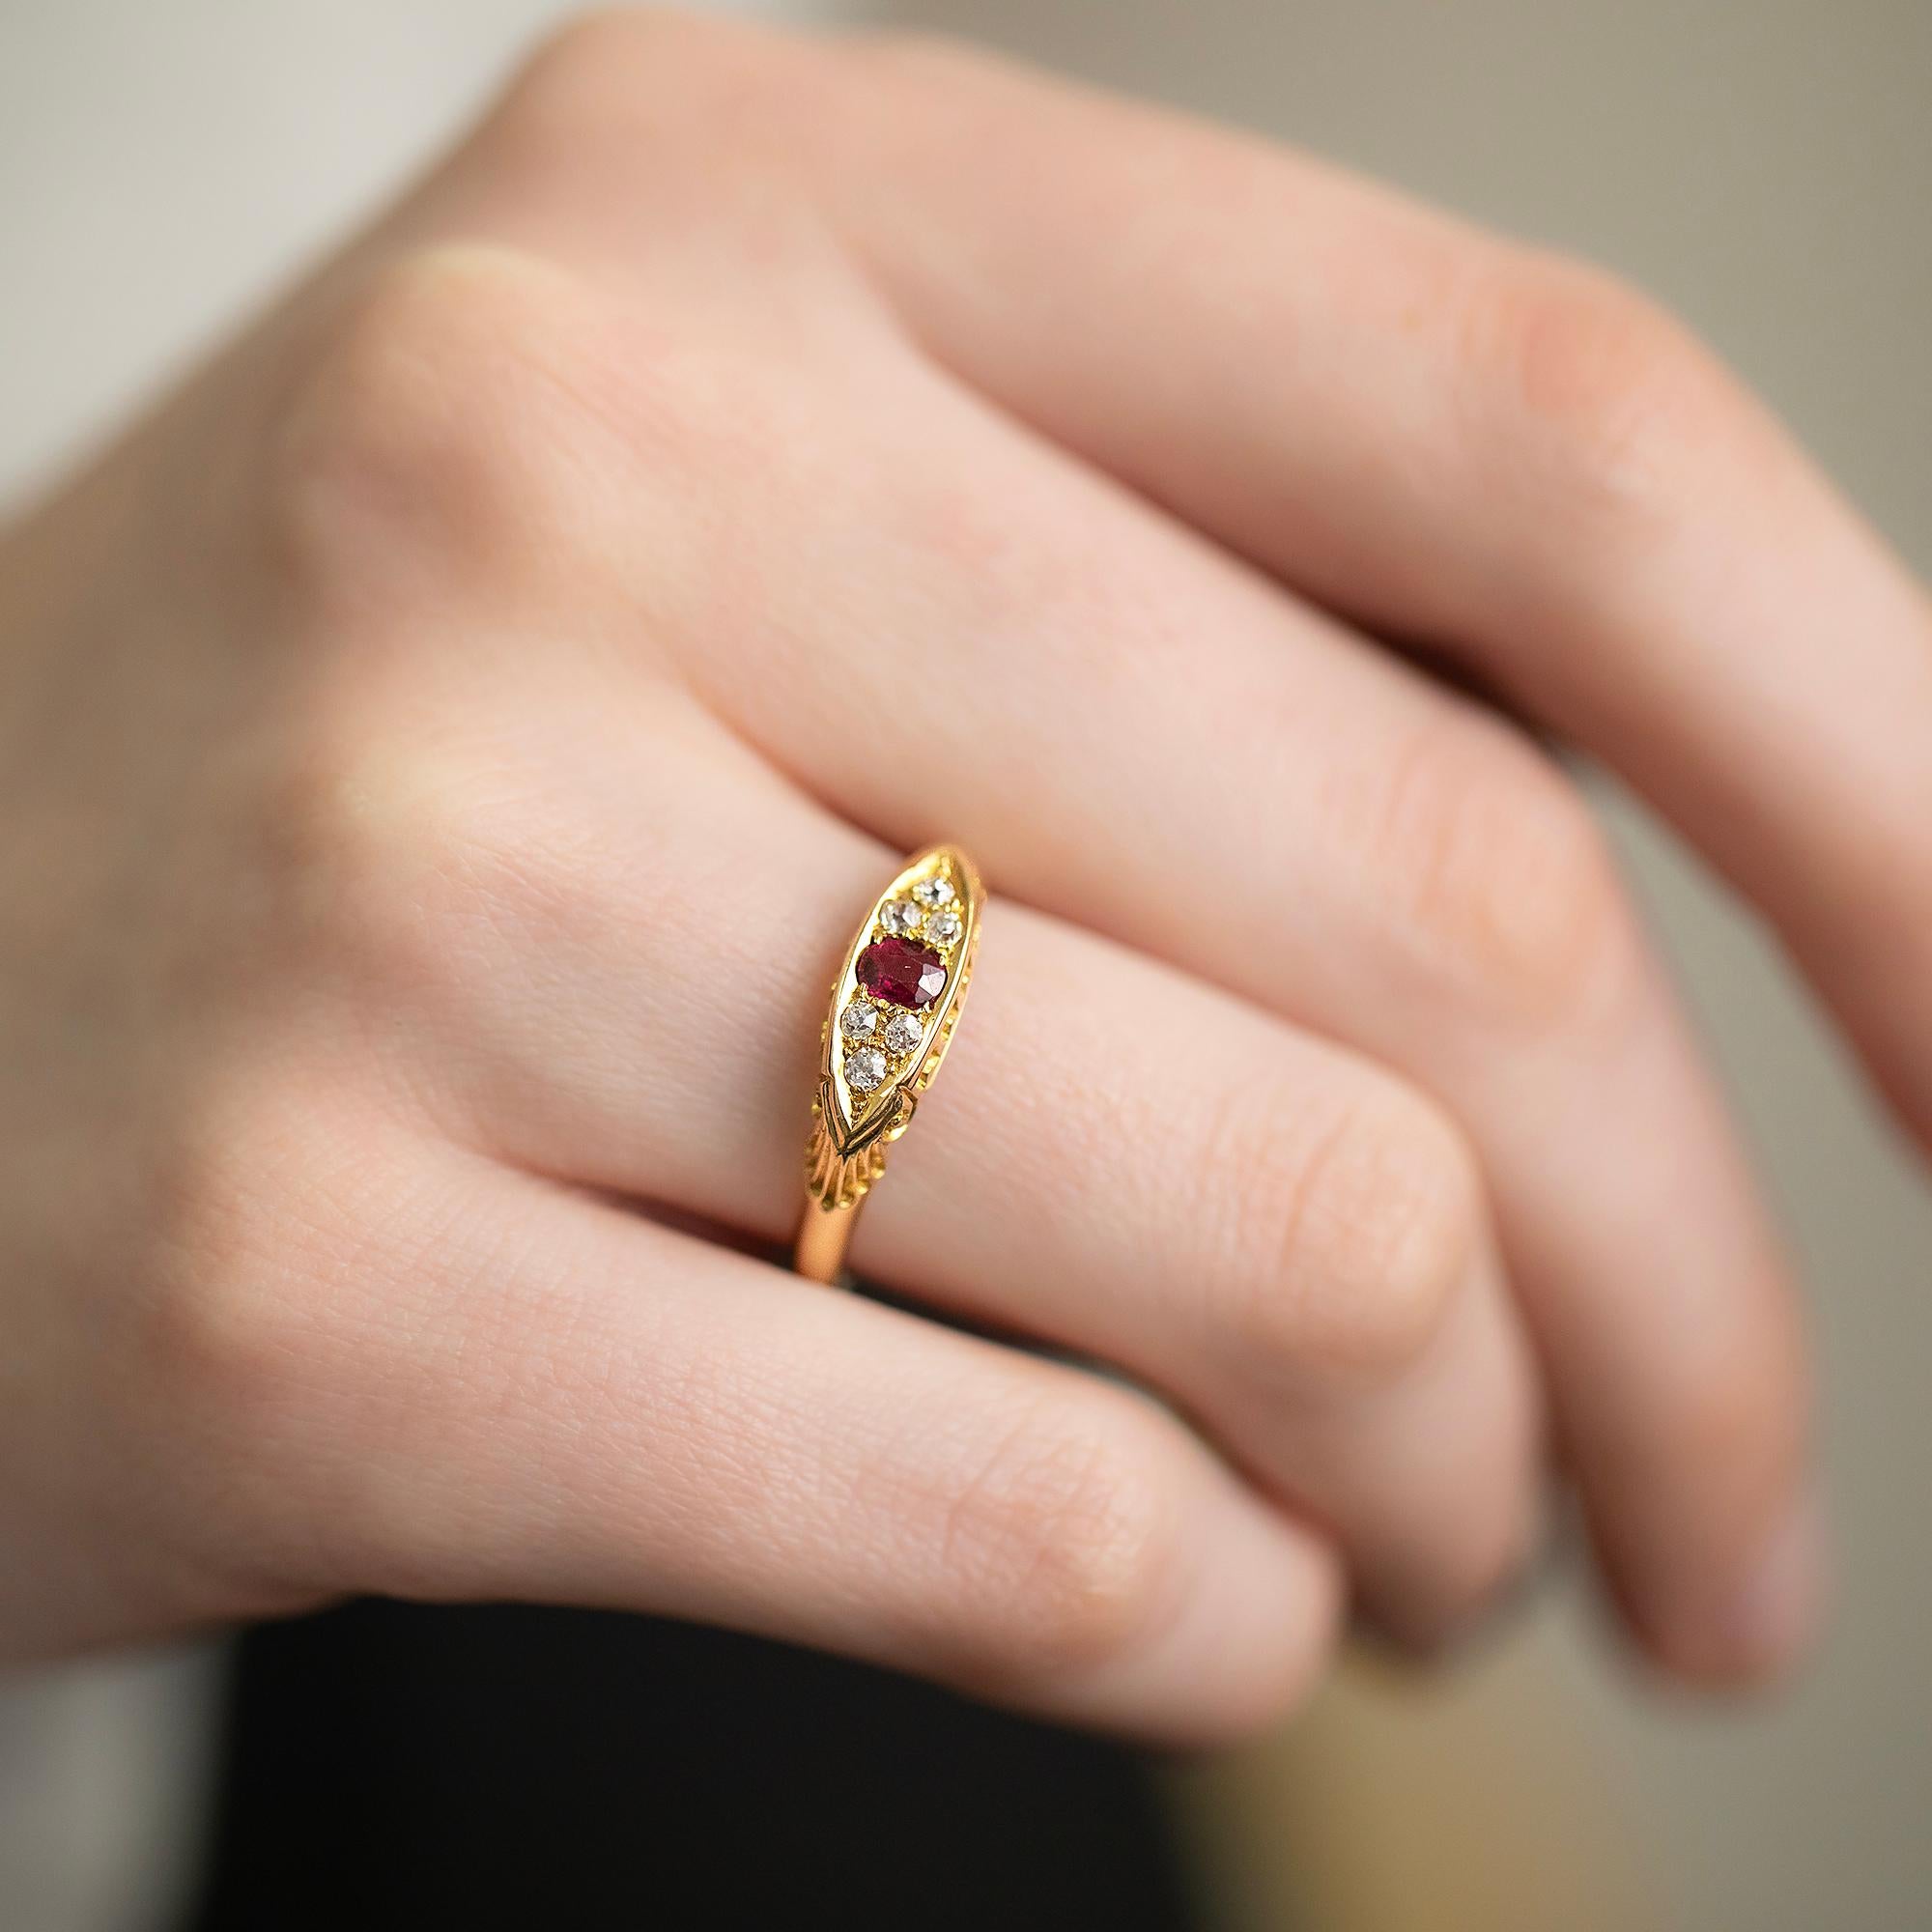 Victorian Ruby and Diamond scrolled half-hoop gypsy style ring – Hallmarked Chester 1895 and with Maker mark C. Bros.
Traditionally, these rings were given as a friendship band, as a gift to either young girls or by lovers and husbands. A simple and